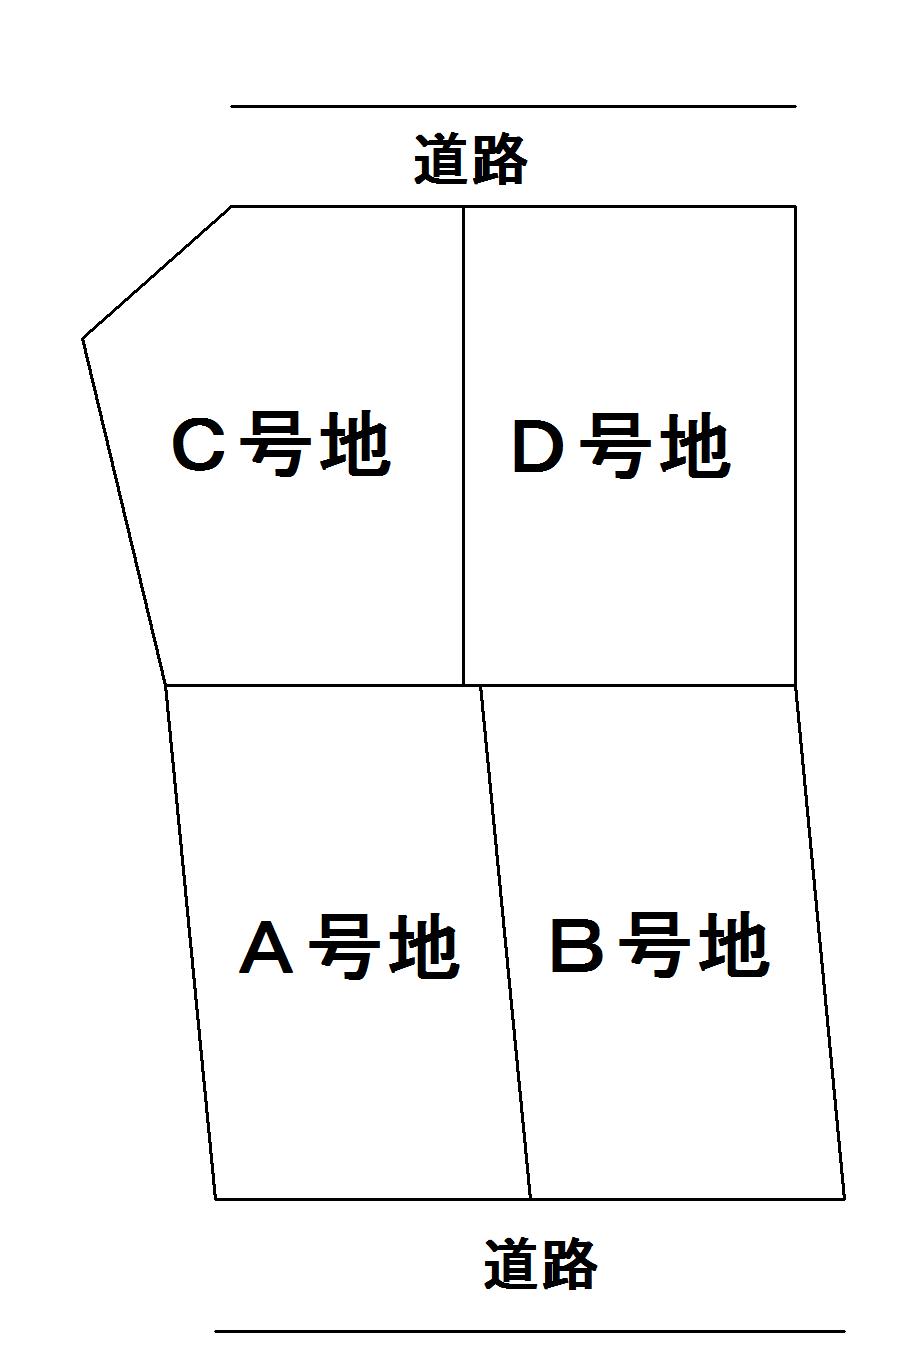 The entire compartment Figure. 4 is a subdivision of section ◇